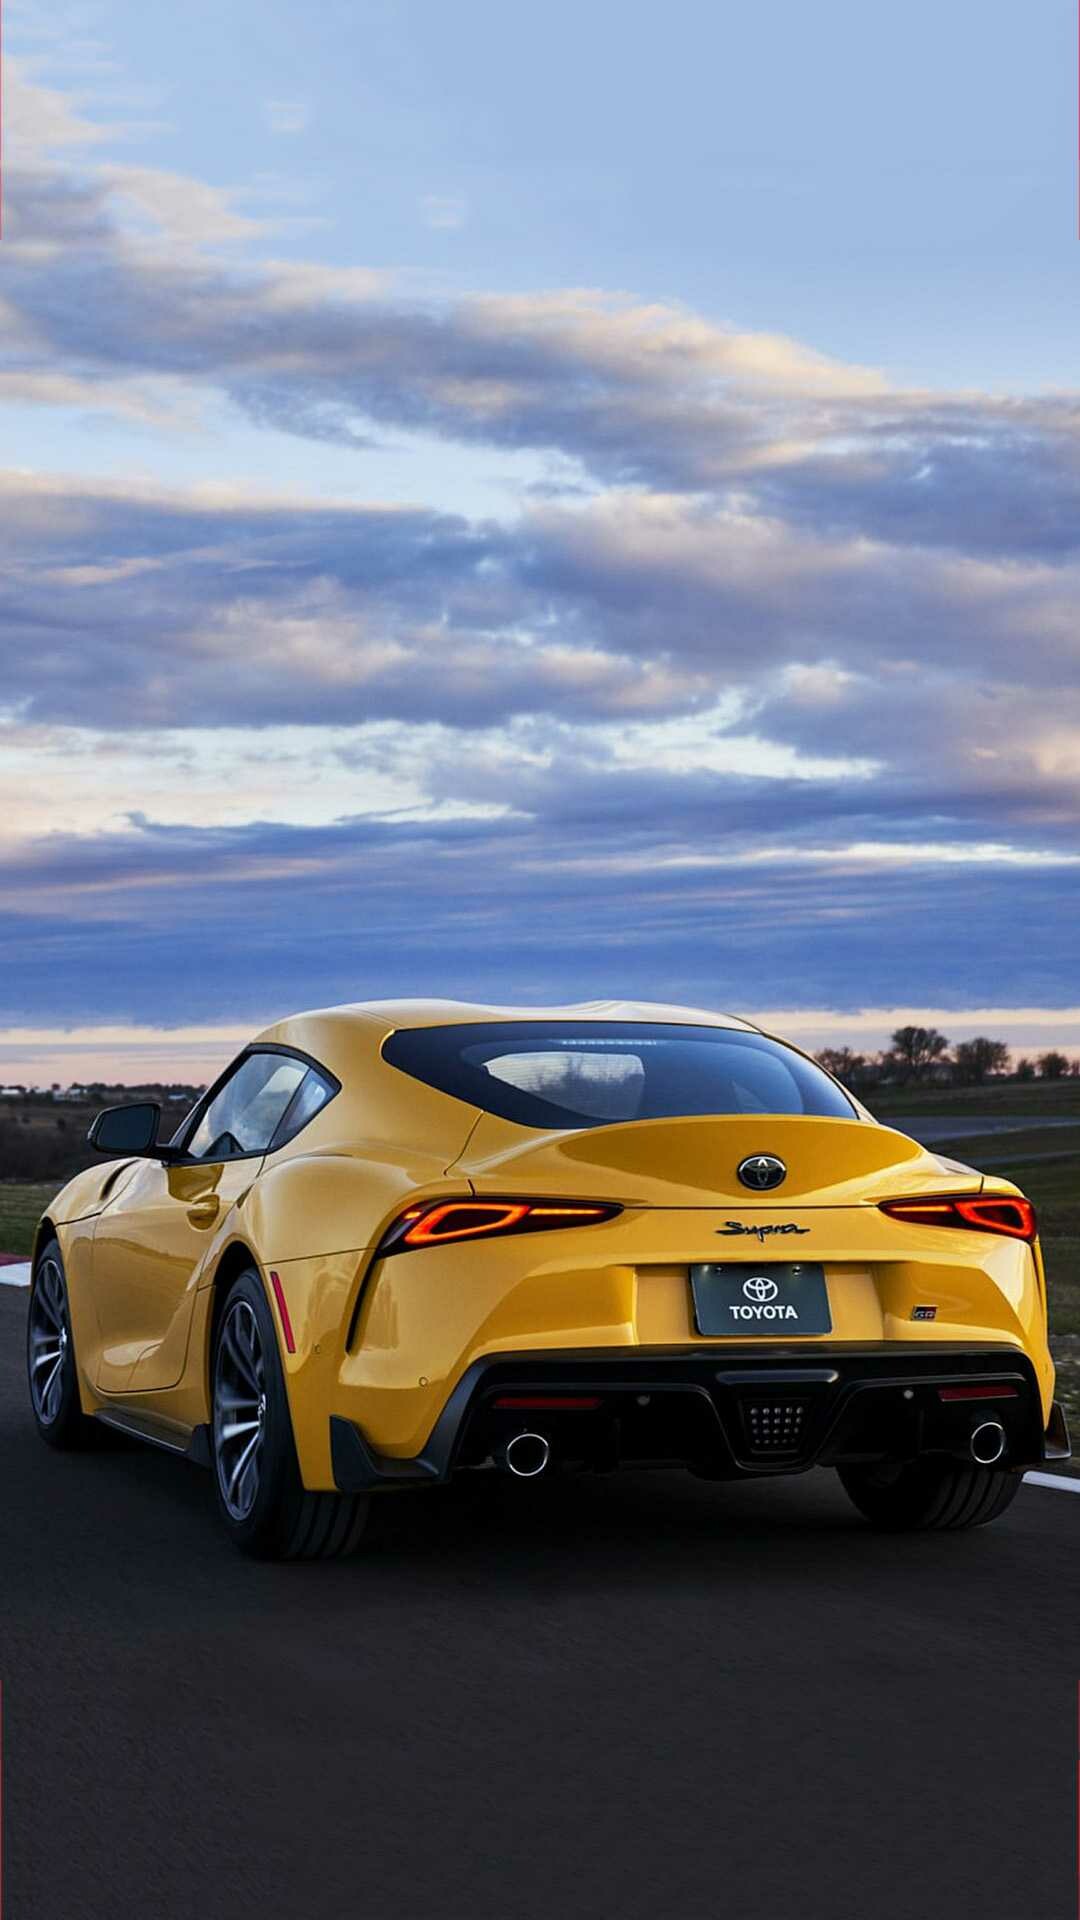 Toyota: Supra, Debuted in 1978 as a high-performance version of the sporty Celica. 1080x1920 Full HD Background.